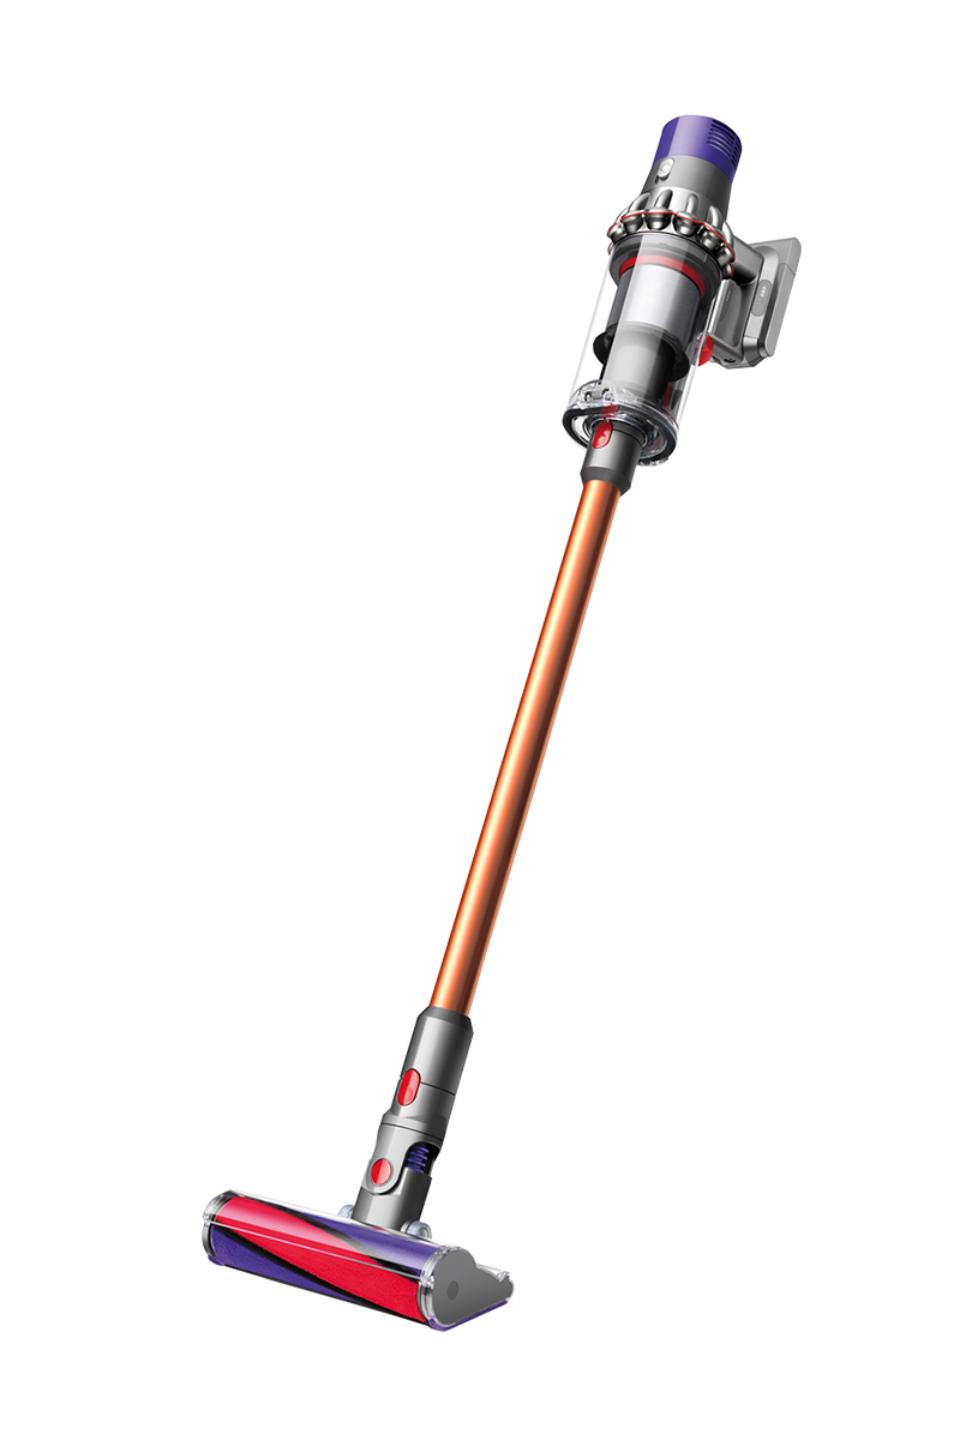 Dyson Cyclone V10 Absolute Vacuum + Floor Dok + 3 Extra Accessories